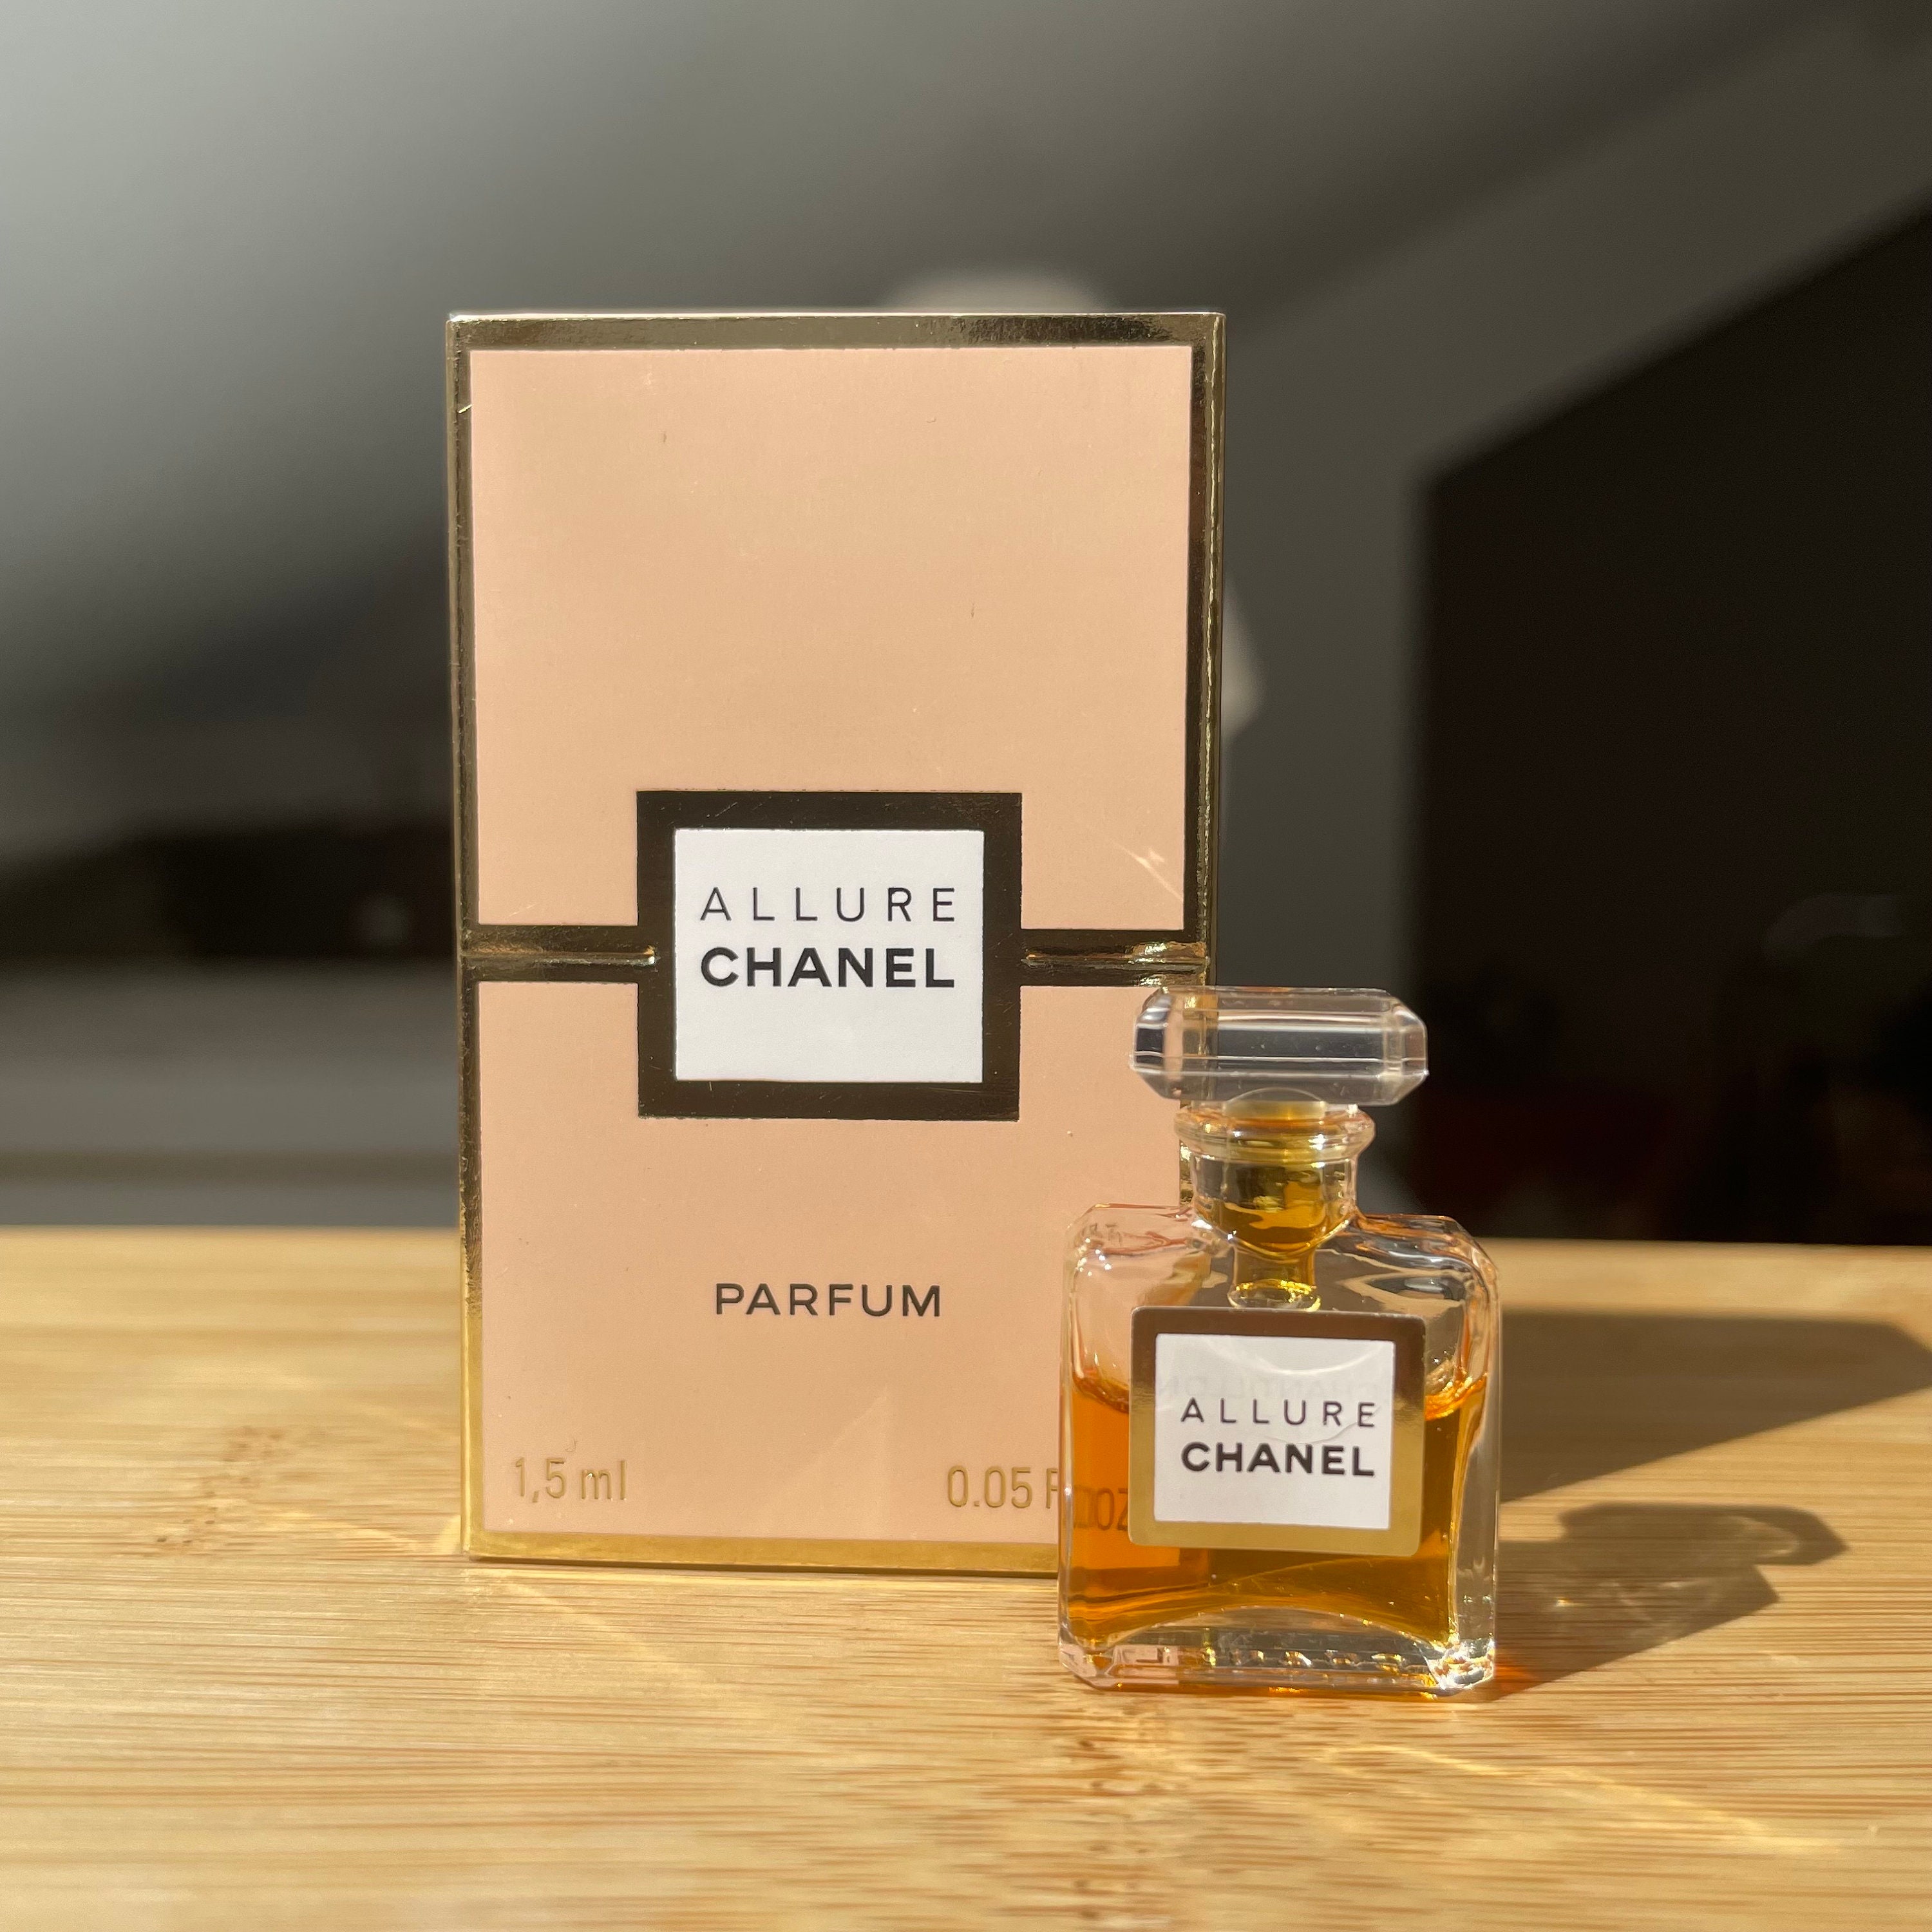 DECANTS] chanel chance bath and body works warm vanilla victorias secret w  dressroom 97, Beauty & Personal Care, Fragrance & Deodorants on Carousell